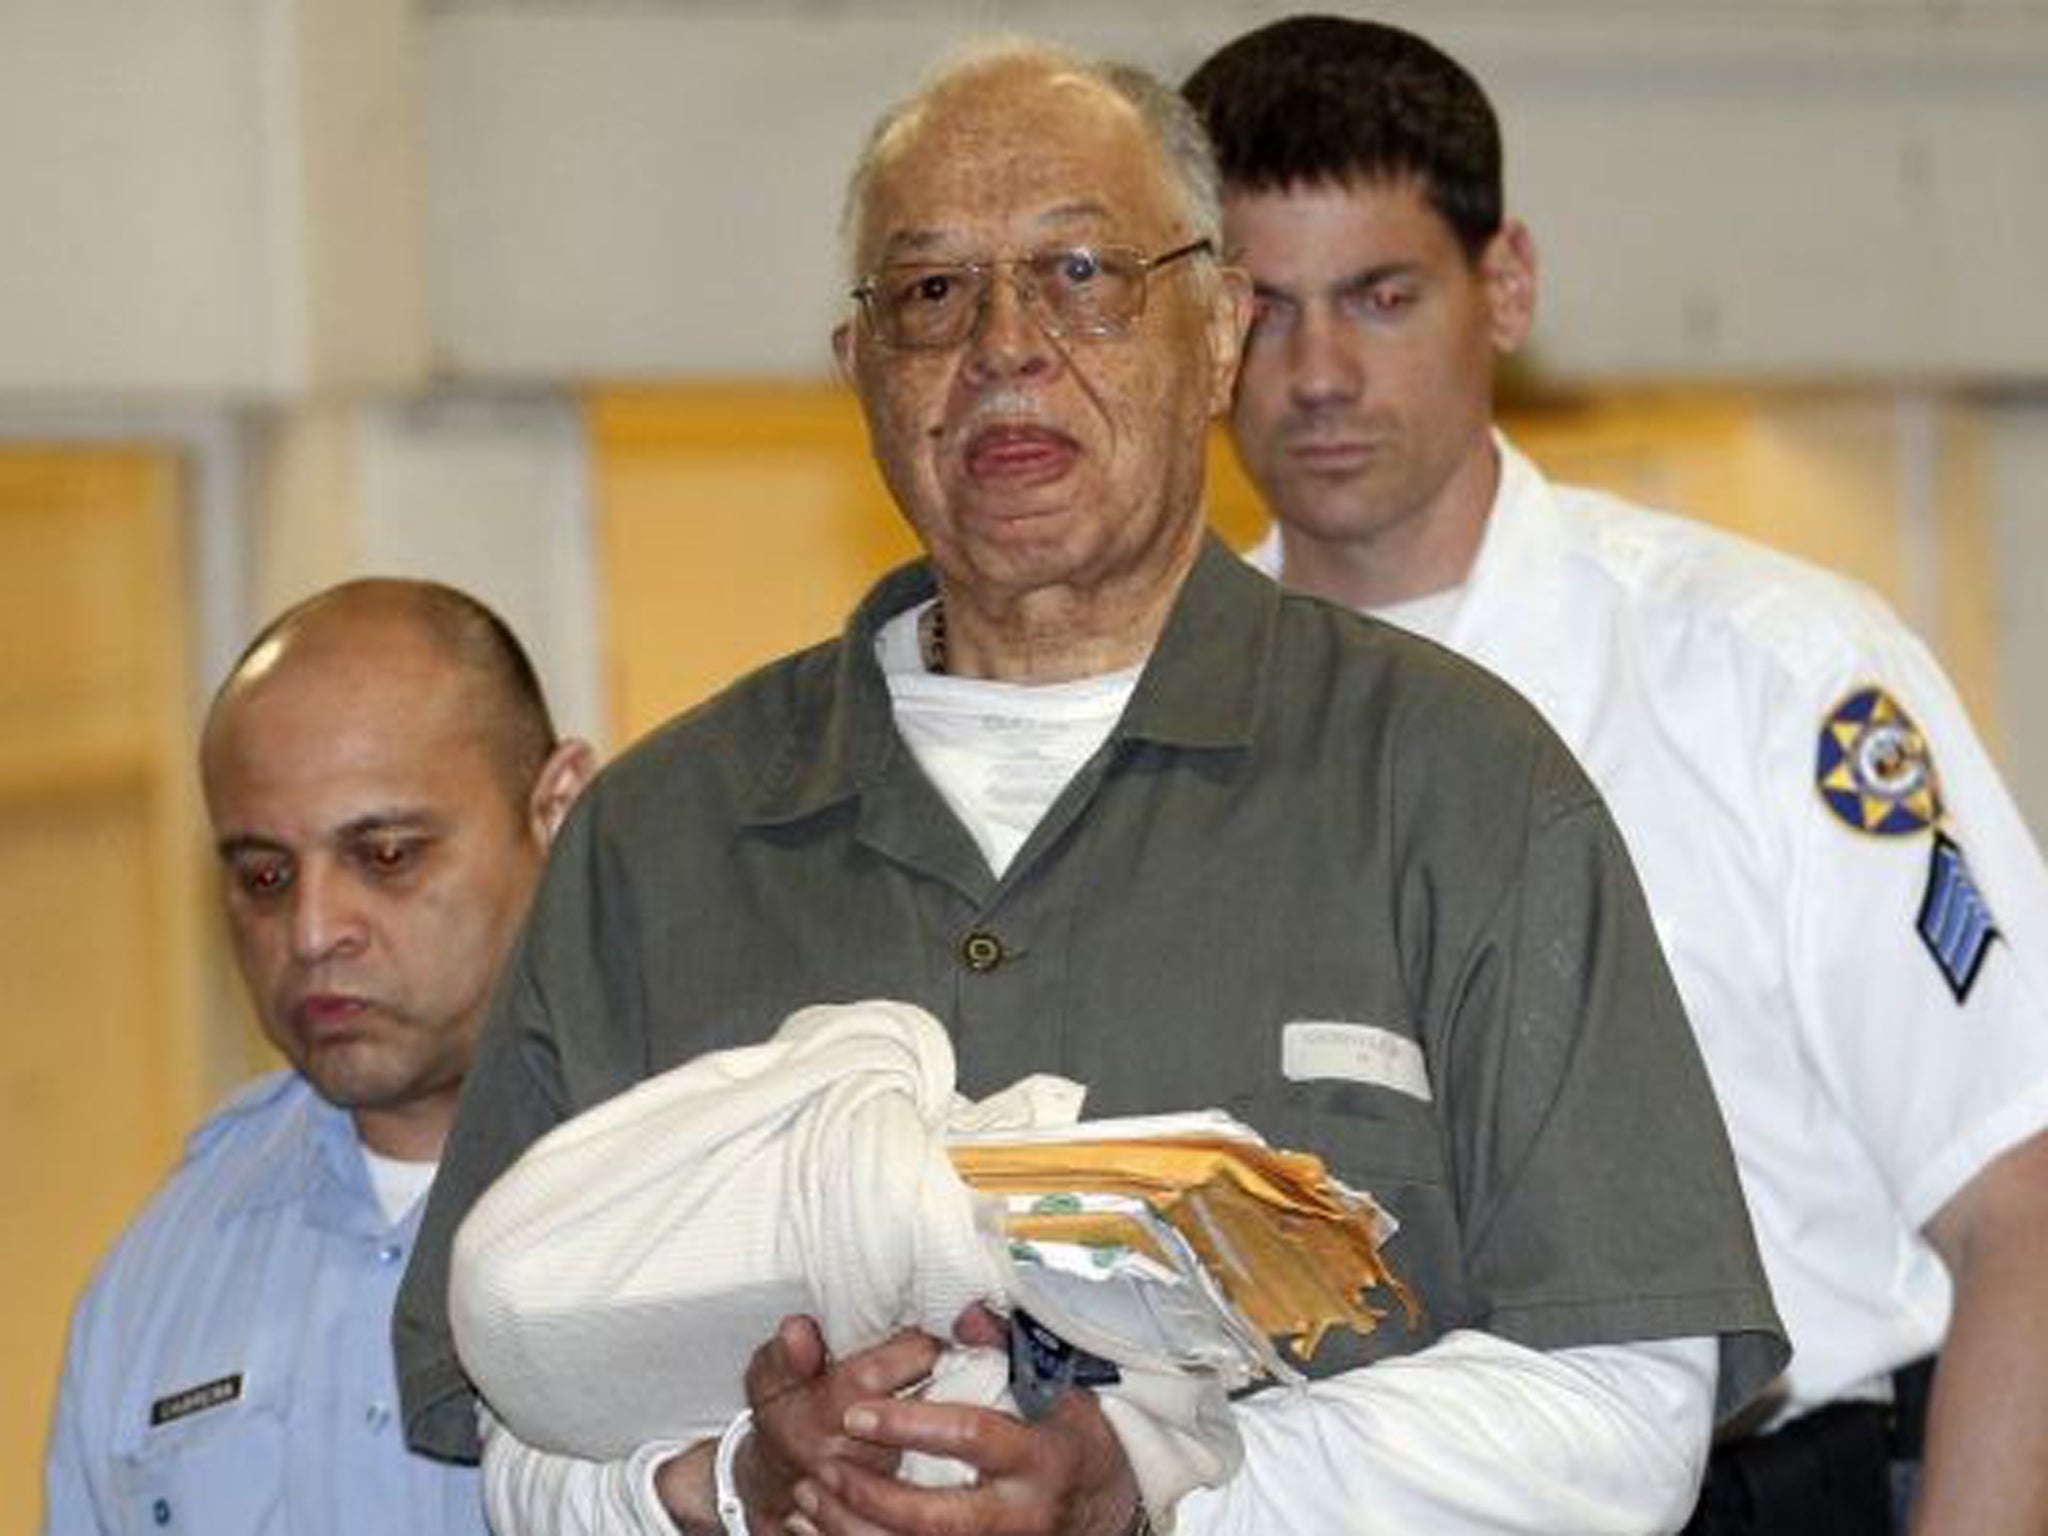 Dr Kermit Gosnell, 72, who ran the now-shuttered Women's Medical Society Clinic, faces the possibility of the death penalty